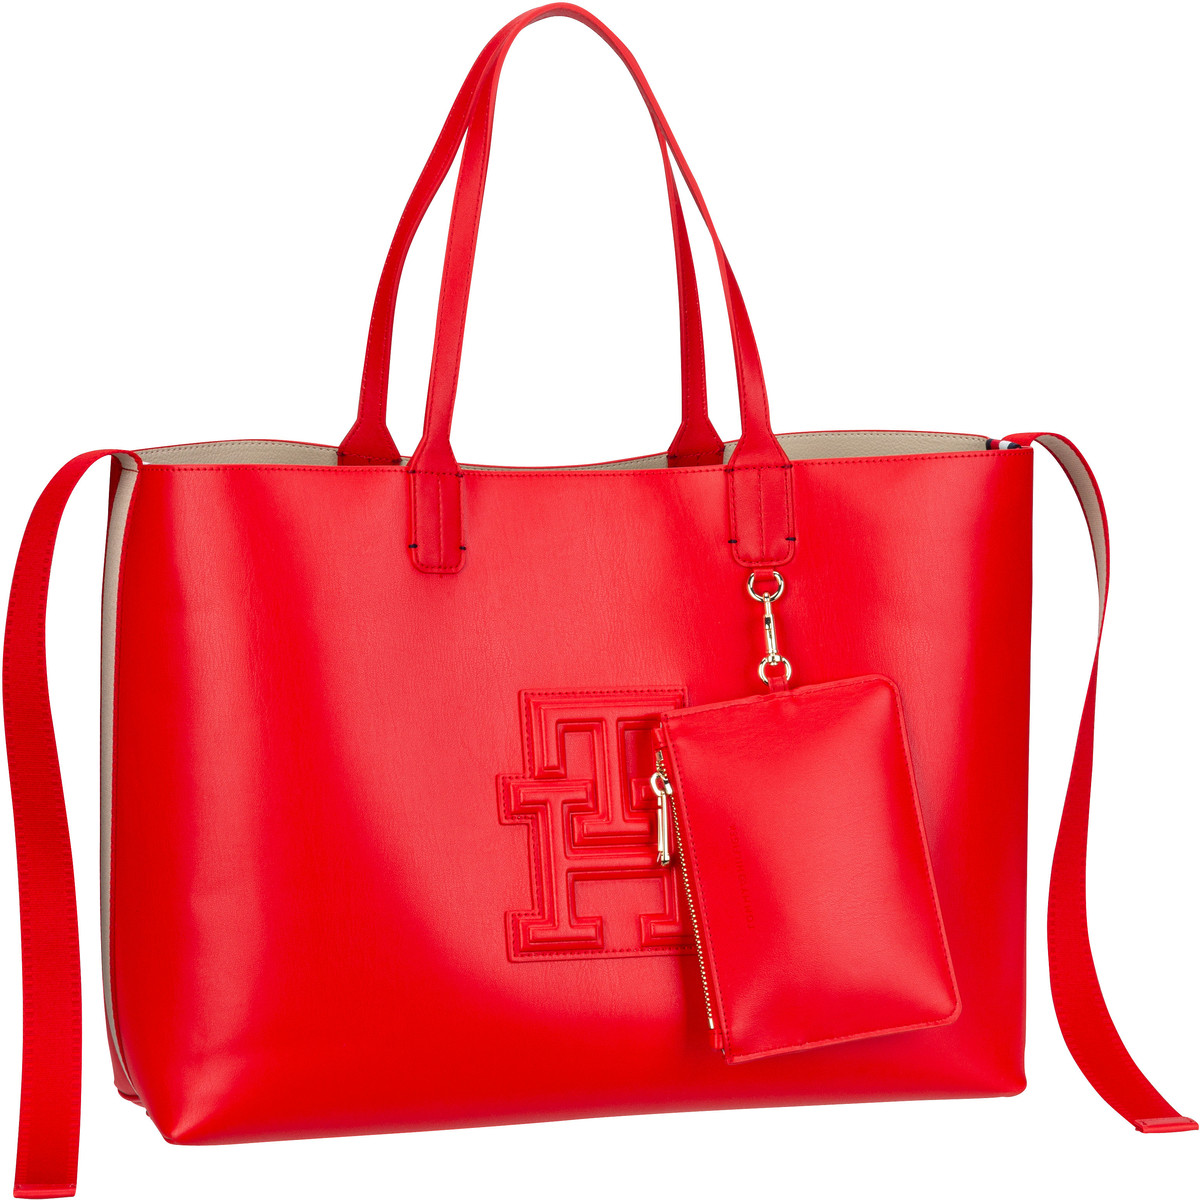 Tommy Hilfiger Iconic Tommy Tote PSP24  in Fierce Red (22 Liter), Shopper